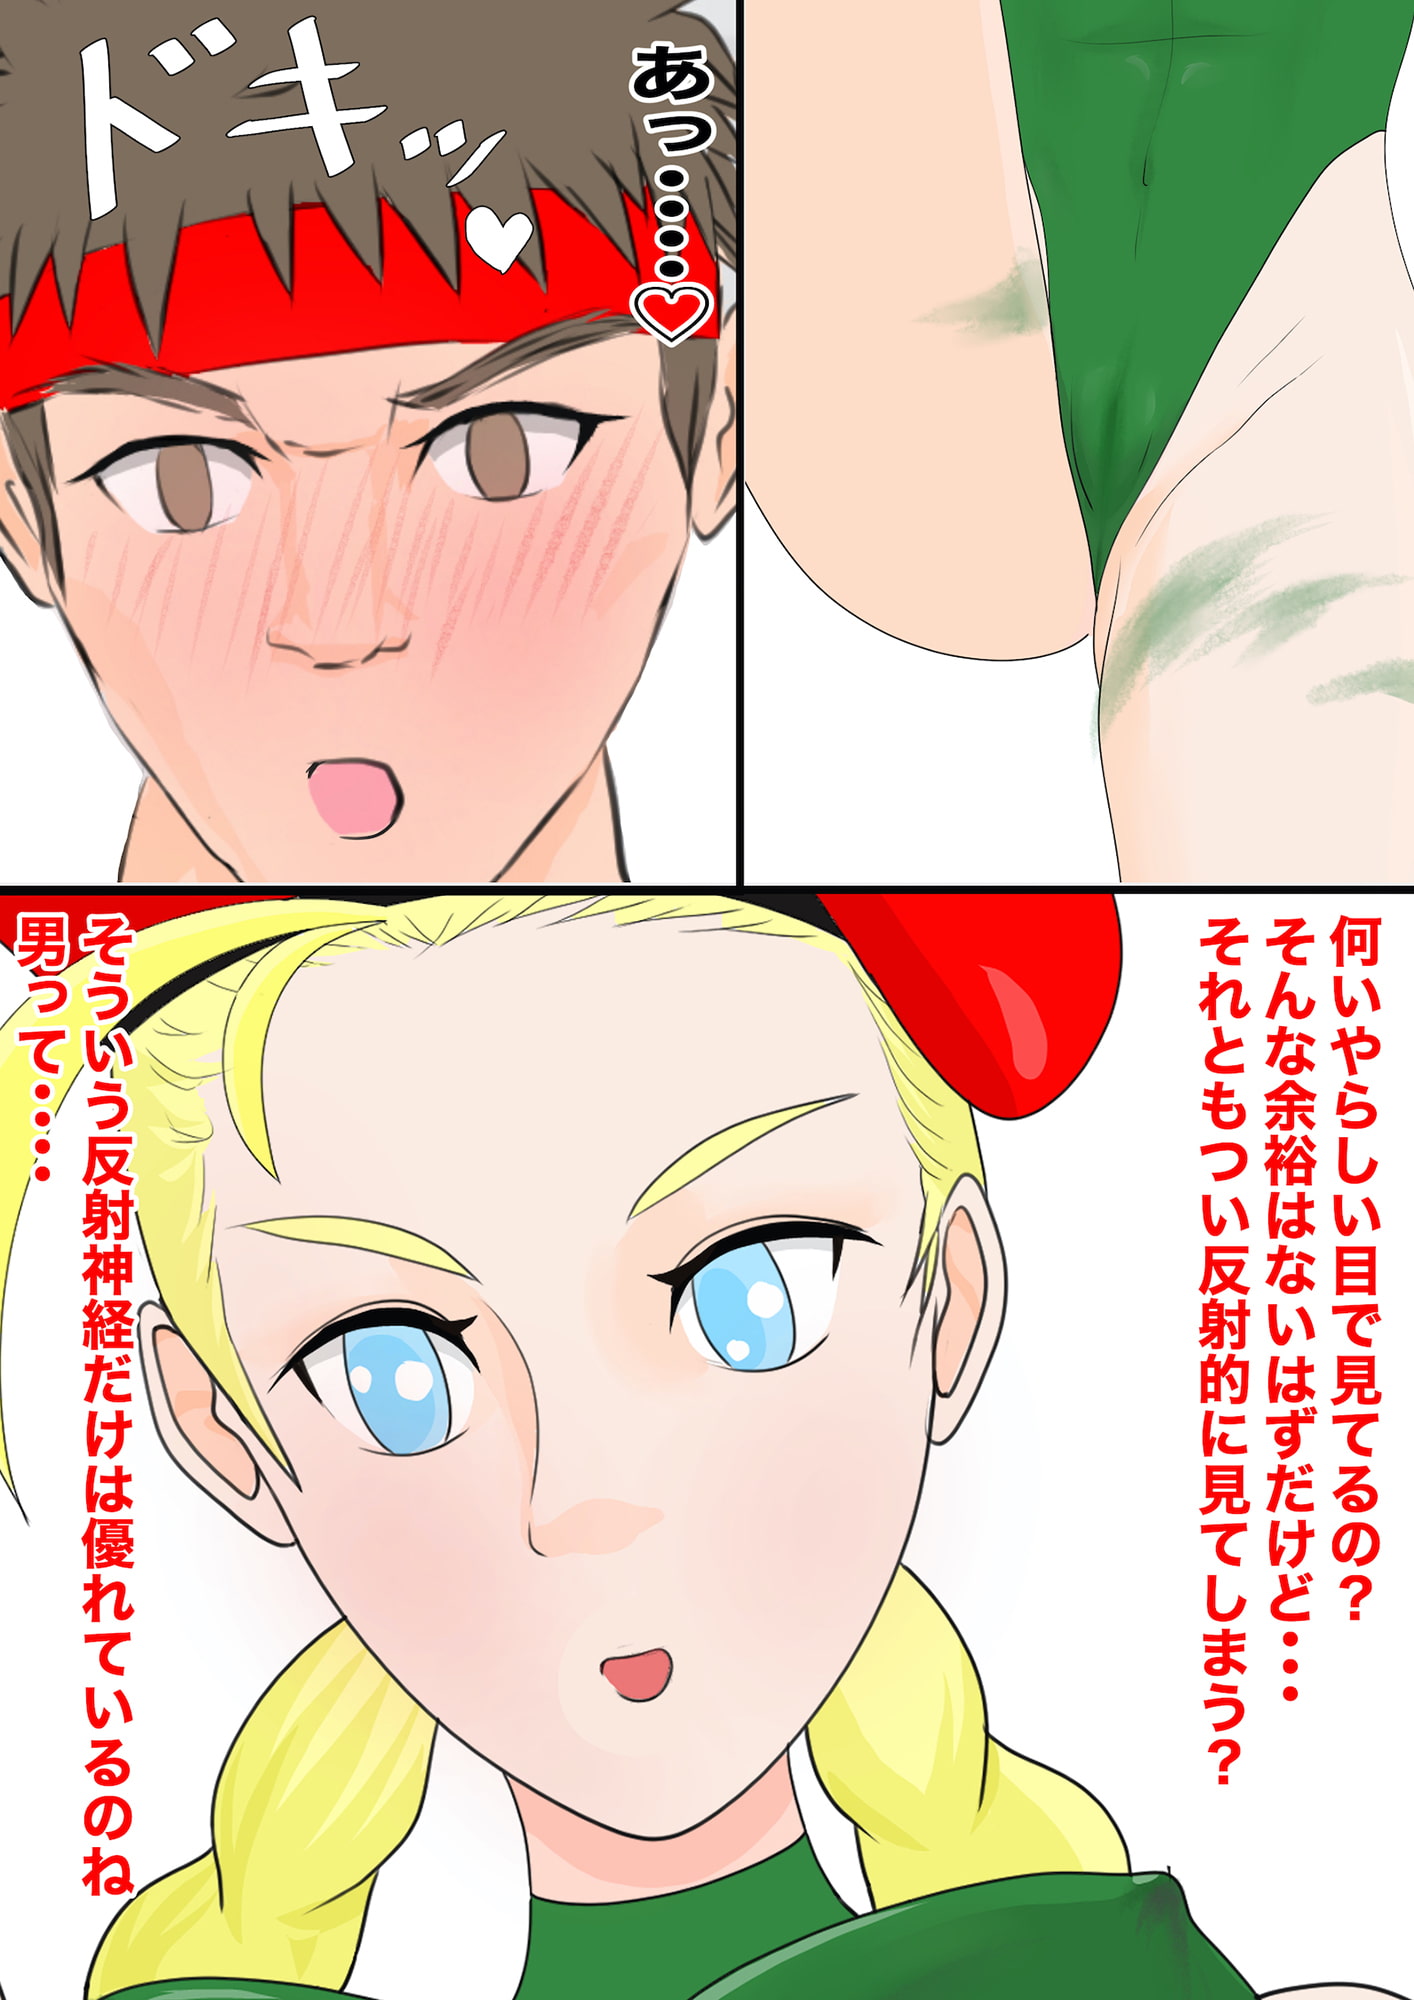 Ryu Couldn't Protect Sakura from Cammy